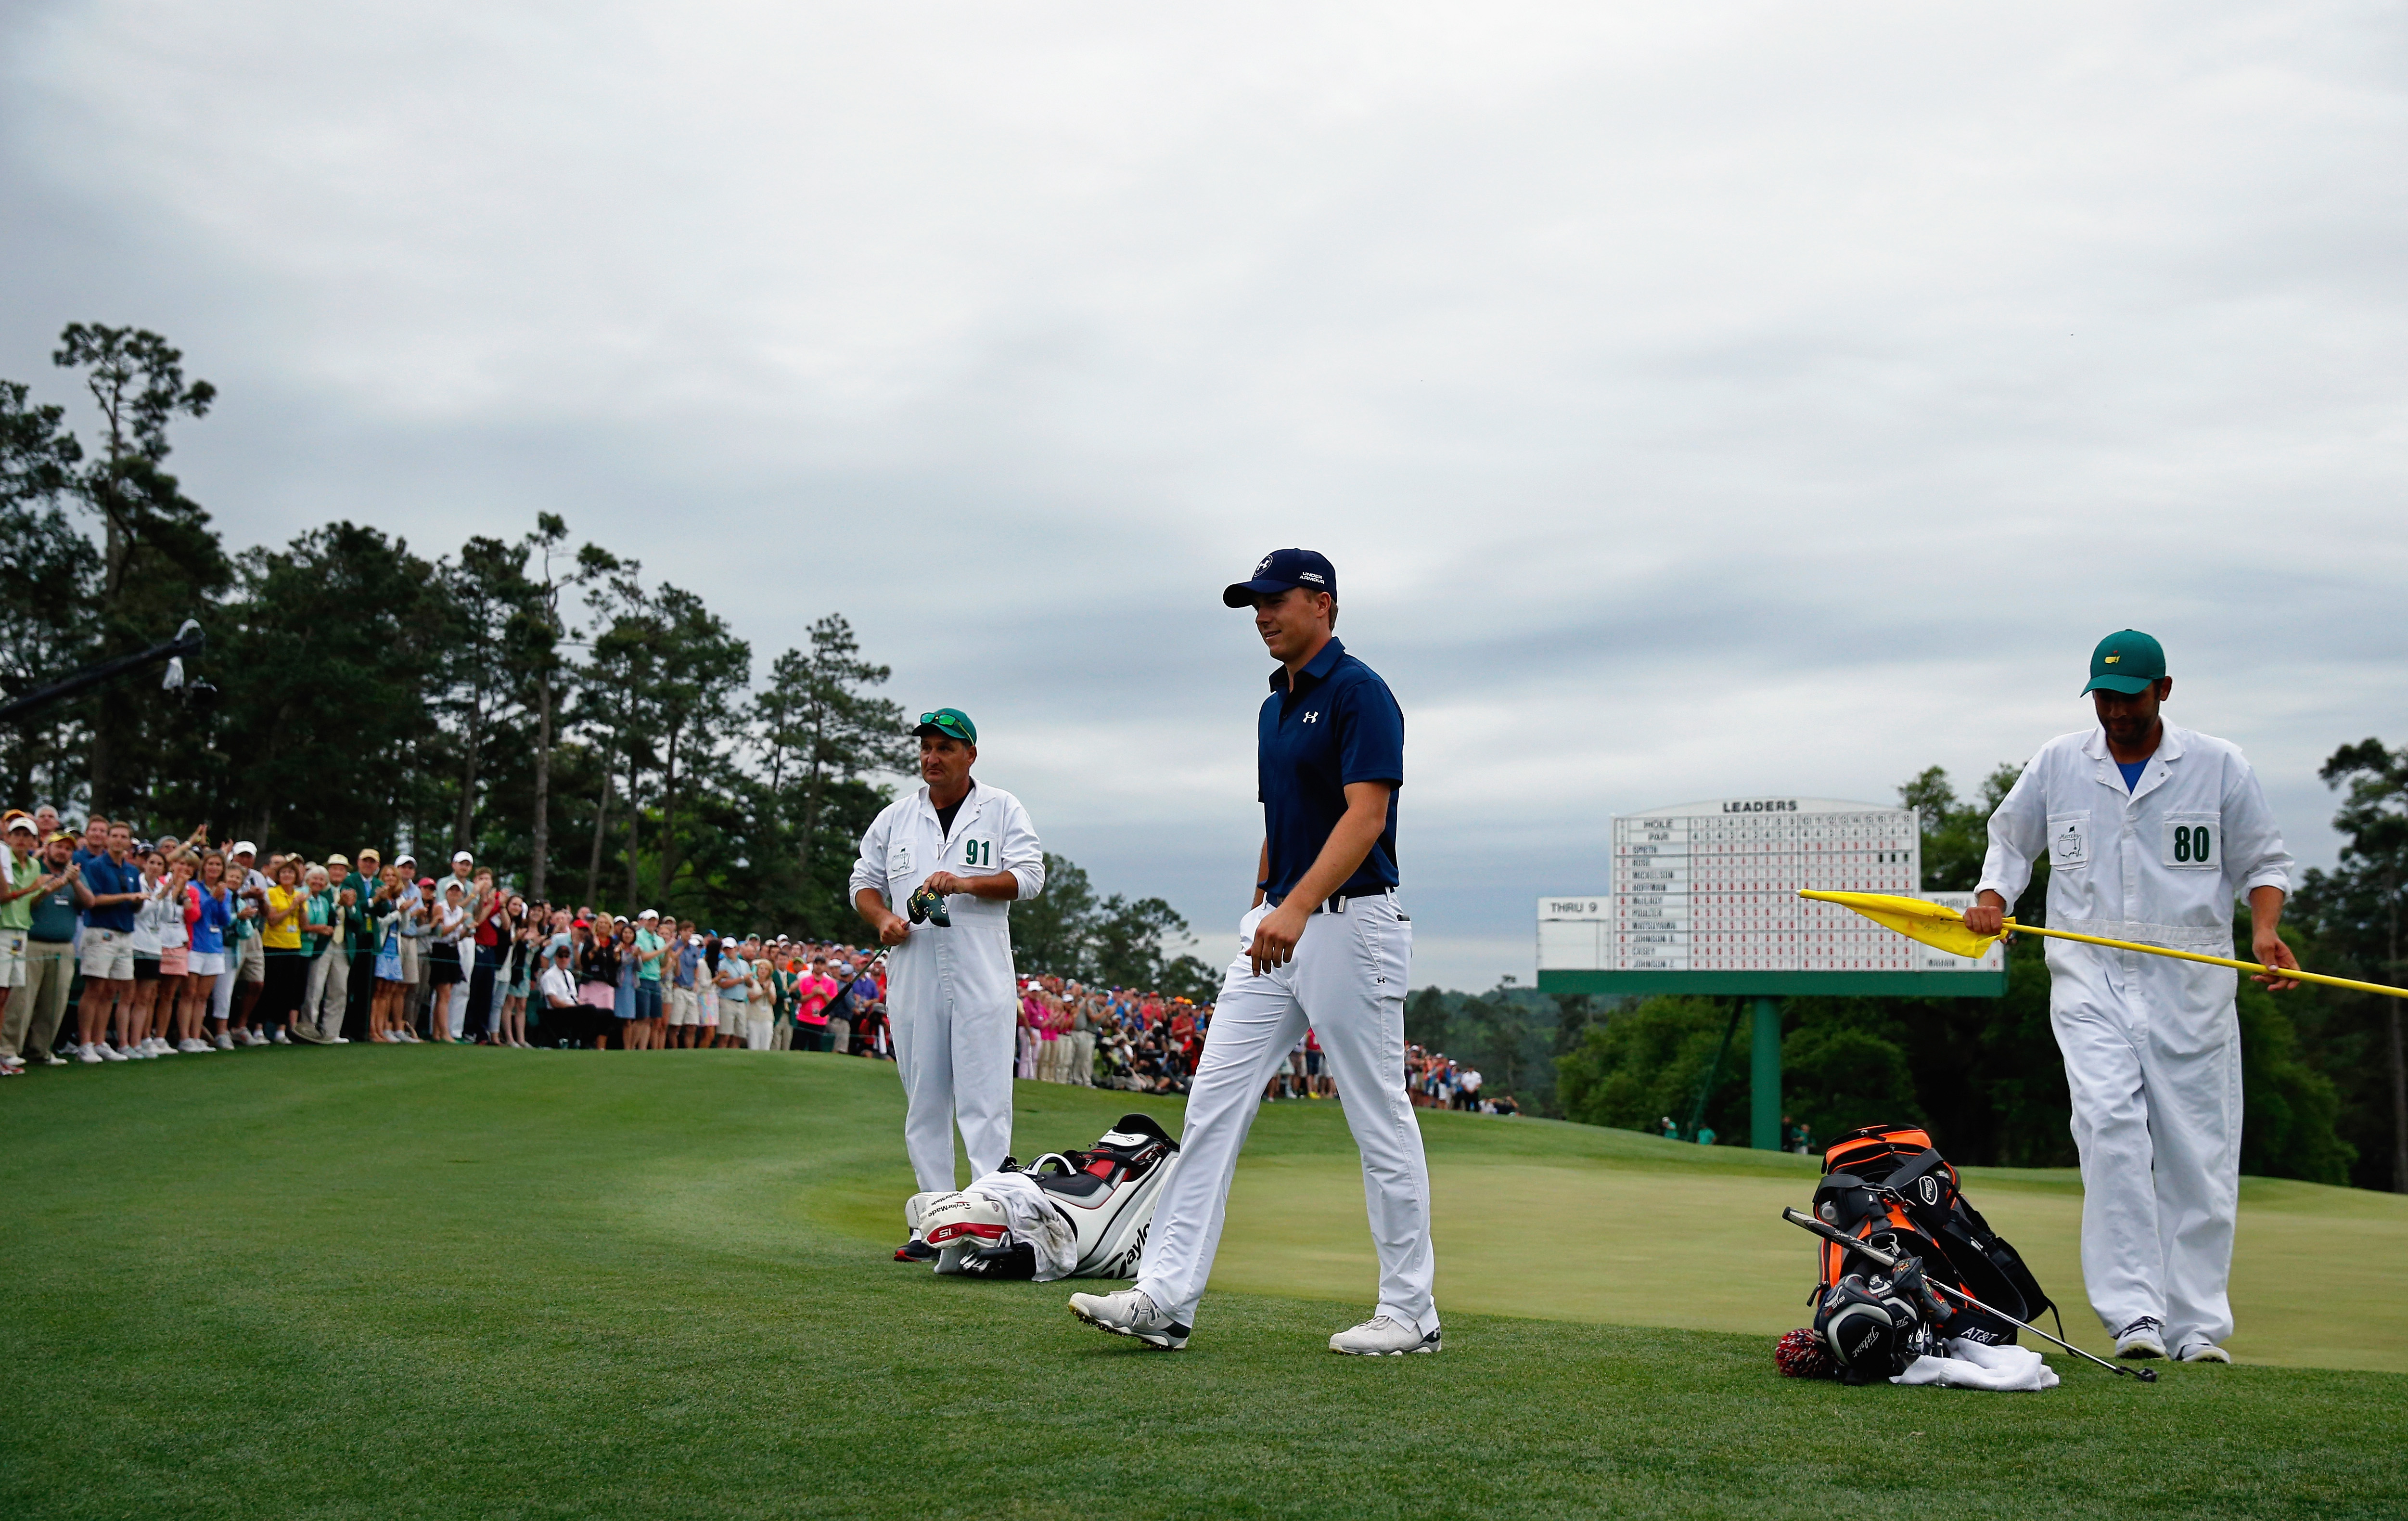 ATandT, DirecTV to set 4K first with Masters coverage SportBusiness Media